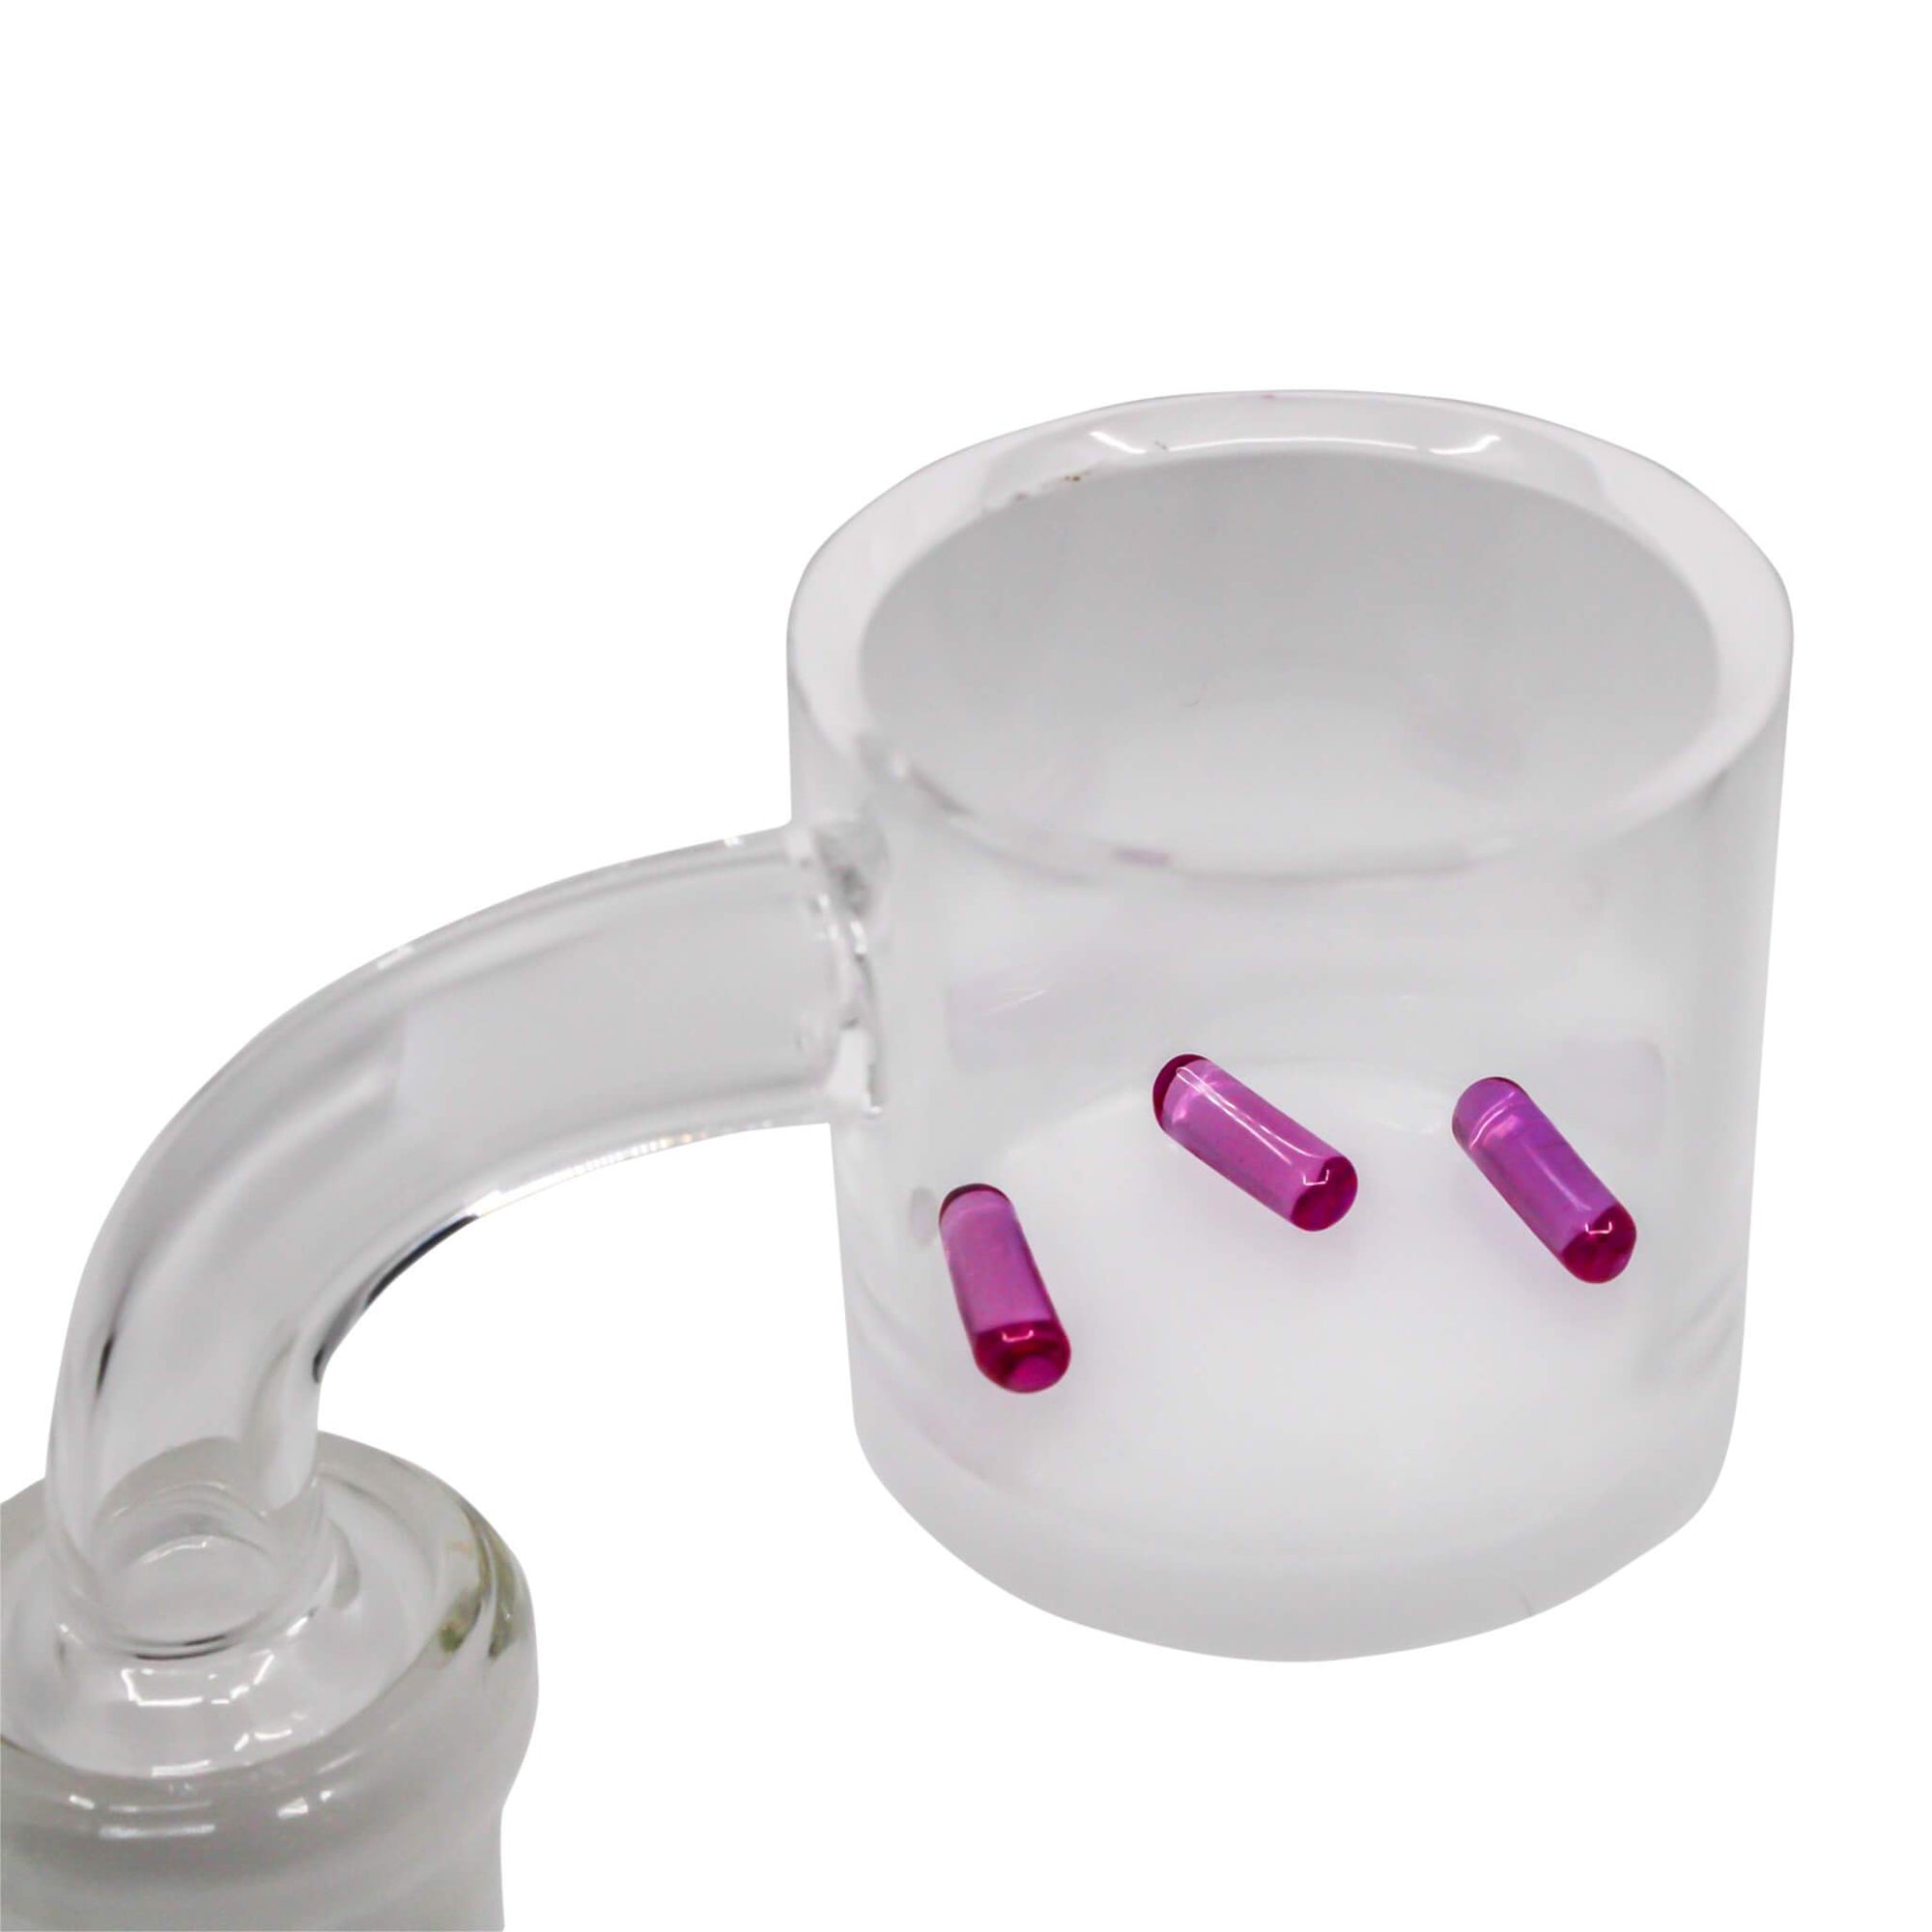 Ruby Capsule Inserts (3-Pack) | Ruby Capsule In Large Banger View | the dabbing specialists